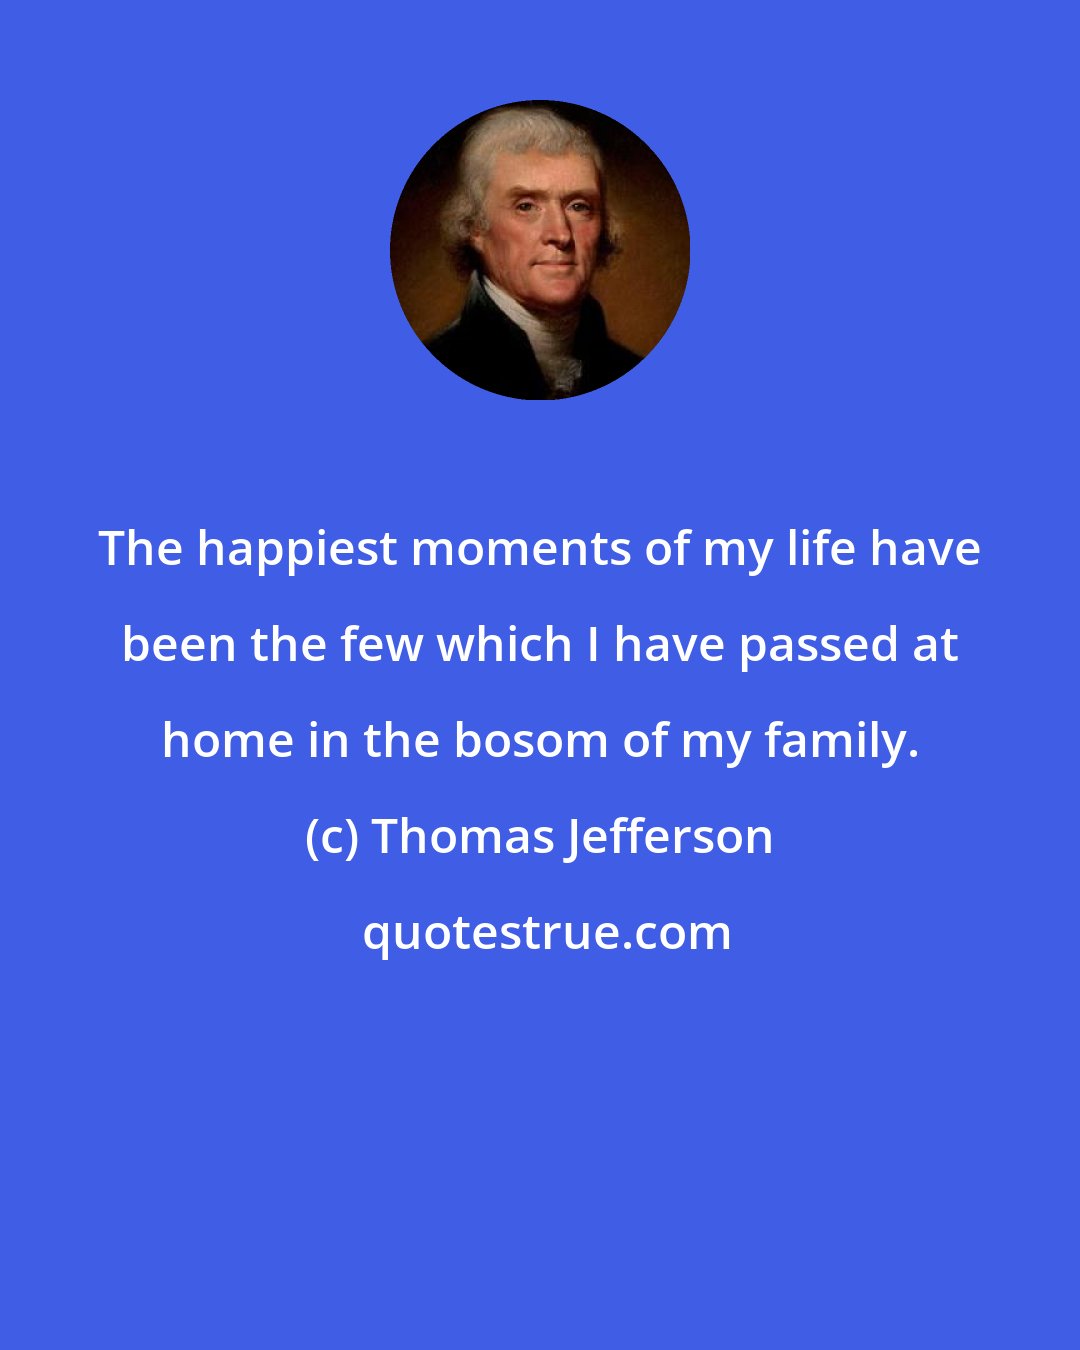 Thomas Jefferson: The happiest moments of my life have been the few which I have passed at home in the bosom of my family.